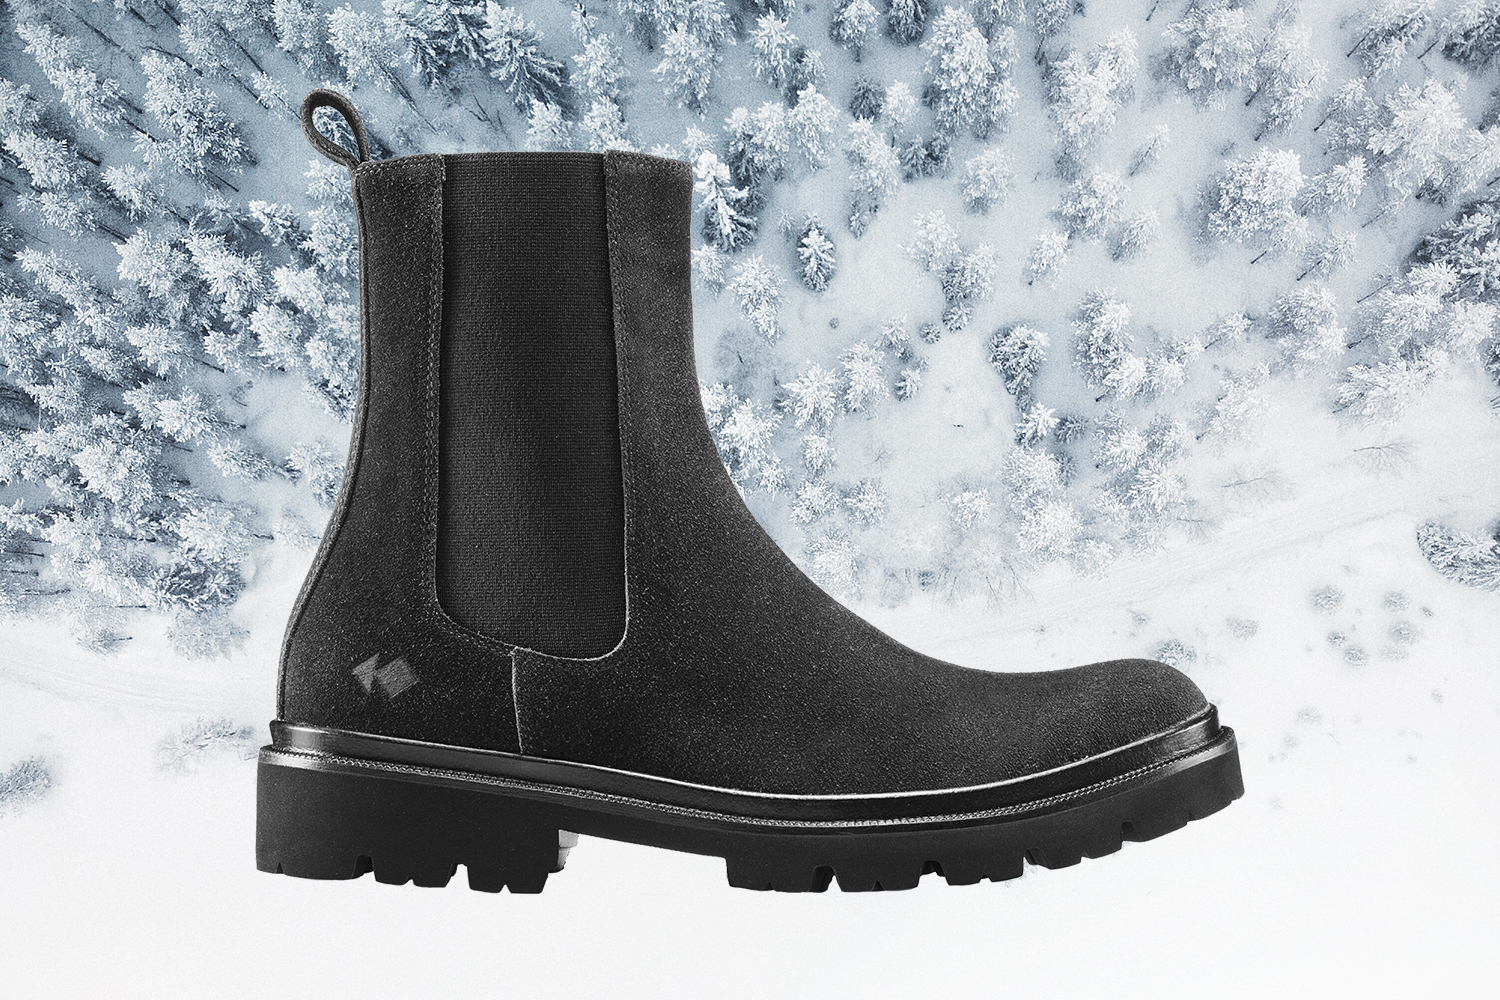 Brand Koio Releases a Men's Winter Boot 